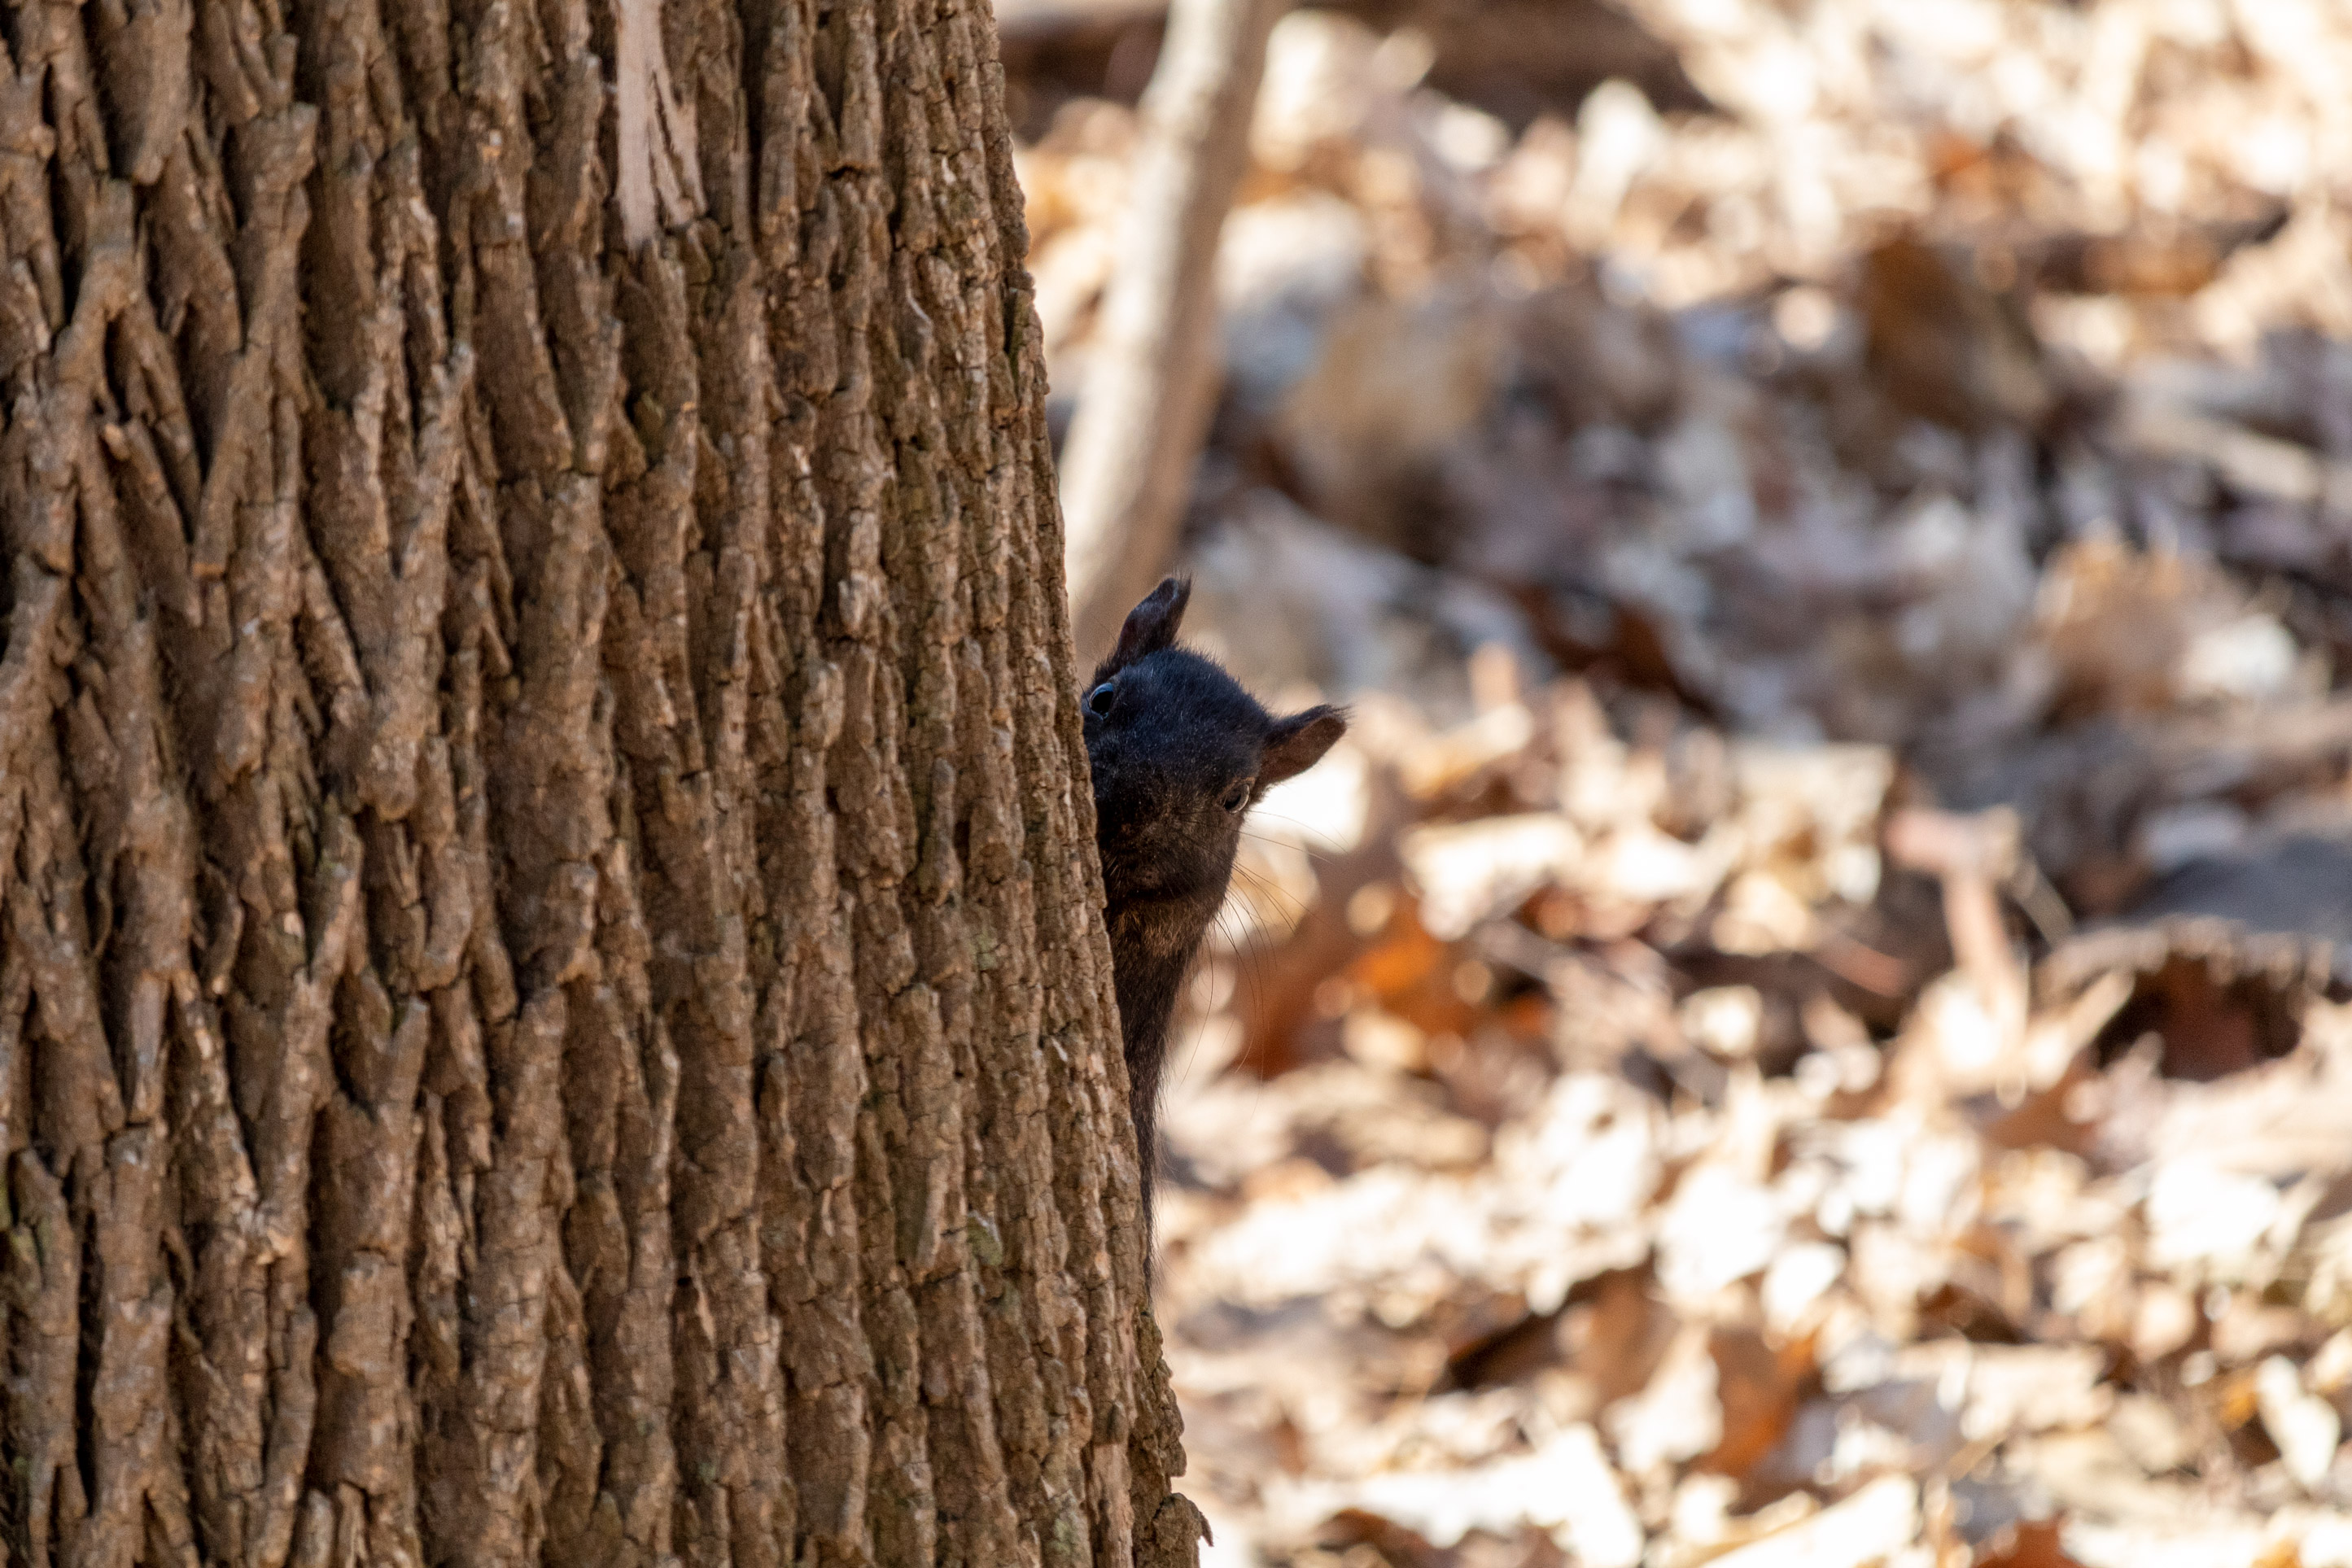 Black squirrel peeking around the side of a tree trunk